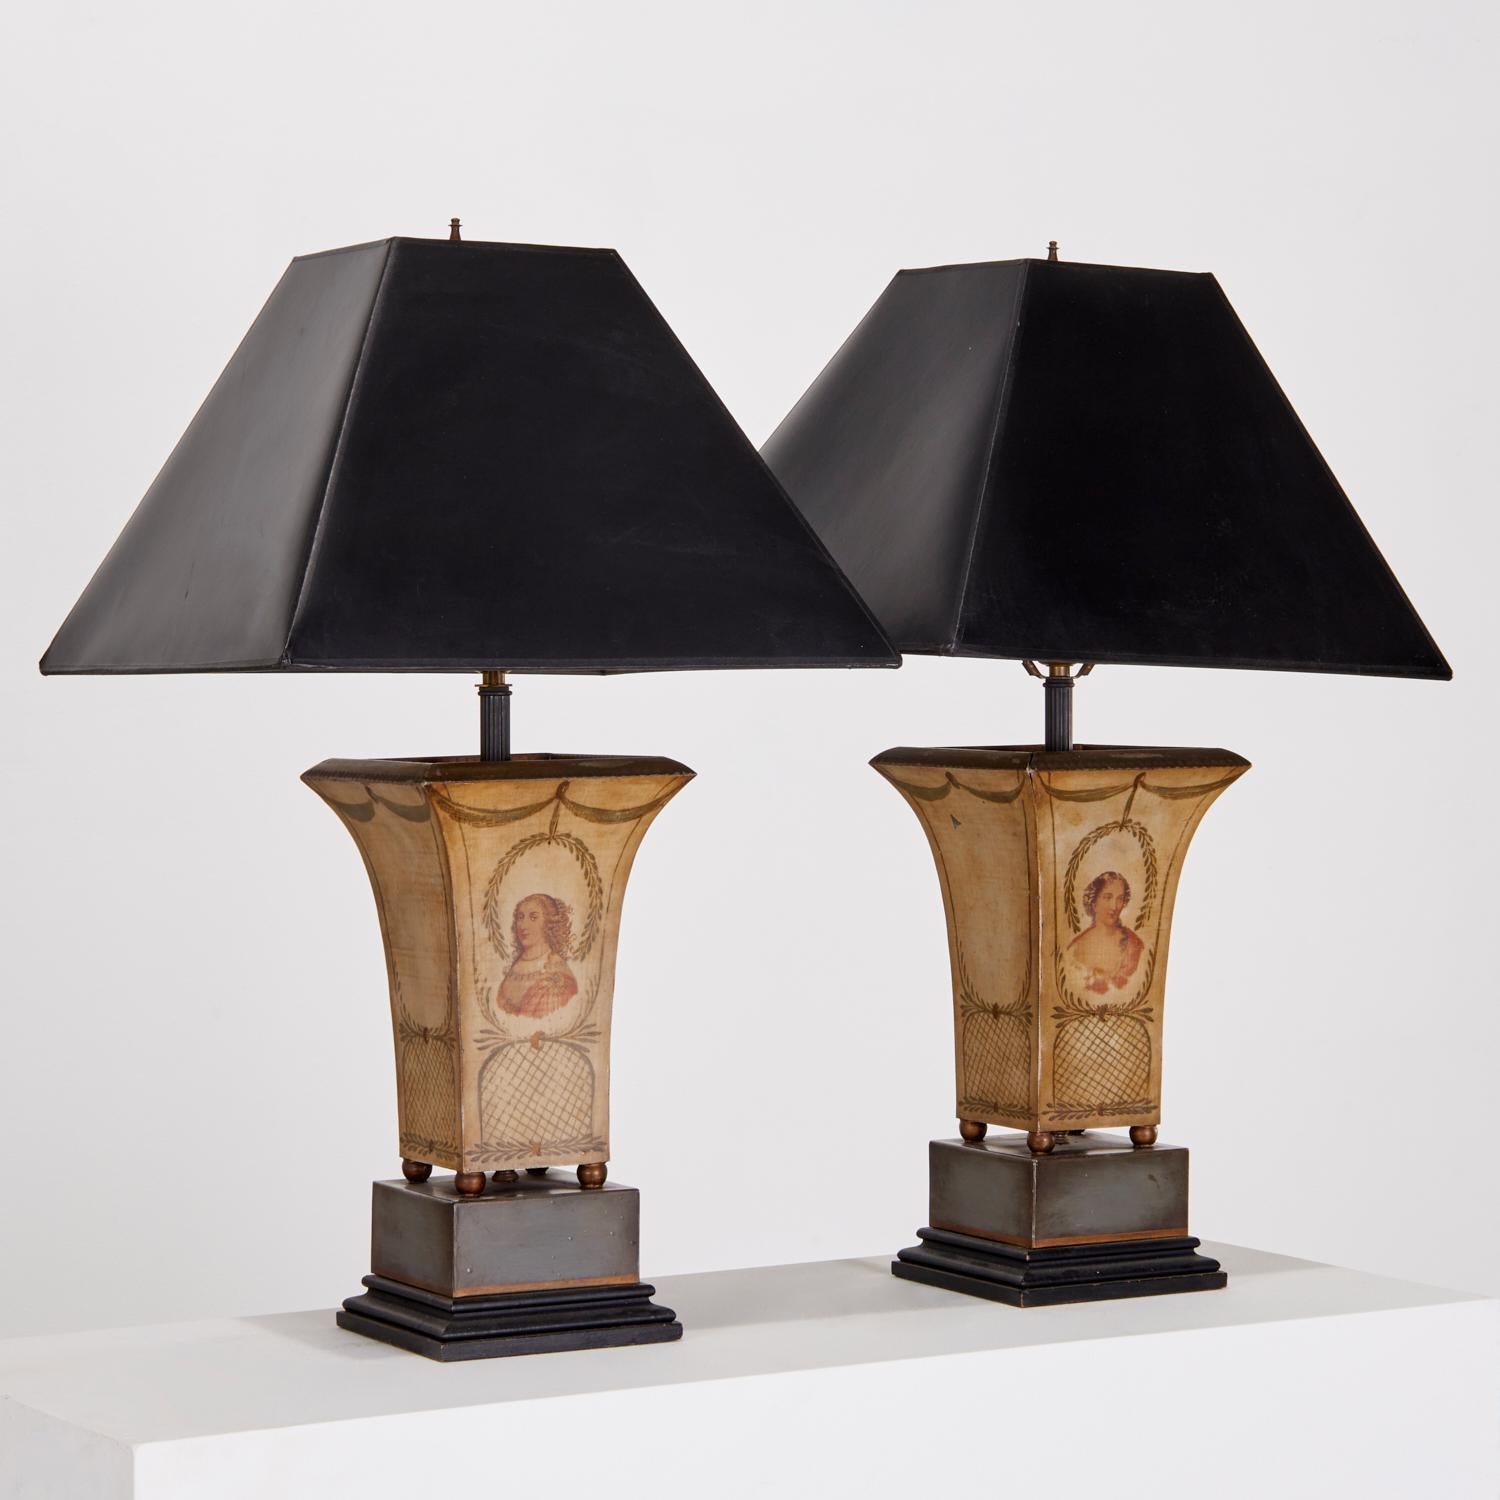 Early 20th c., a pair of Regency style tole peinte table lamps made of polychrome painted sheet metal.  Each lamp is decorated with a charming female bust and lattice borders on the facing side and with an all over cream ground. The lamps have brass